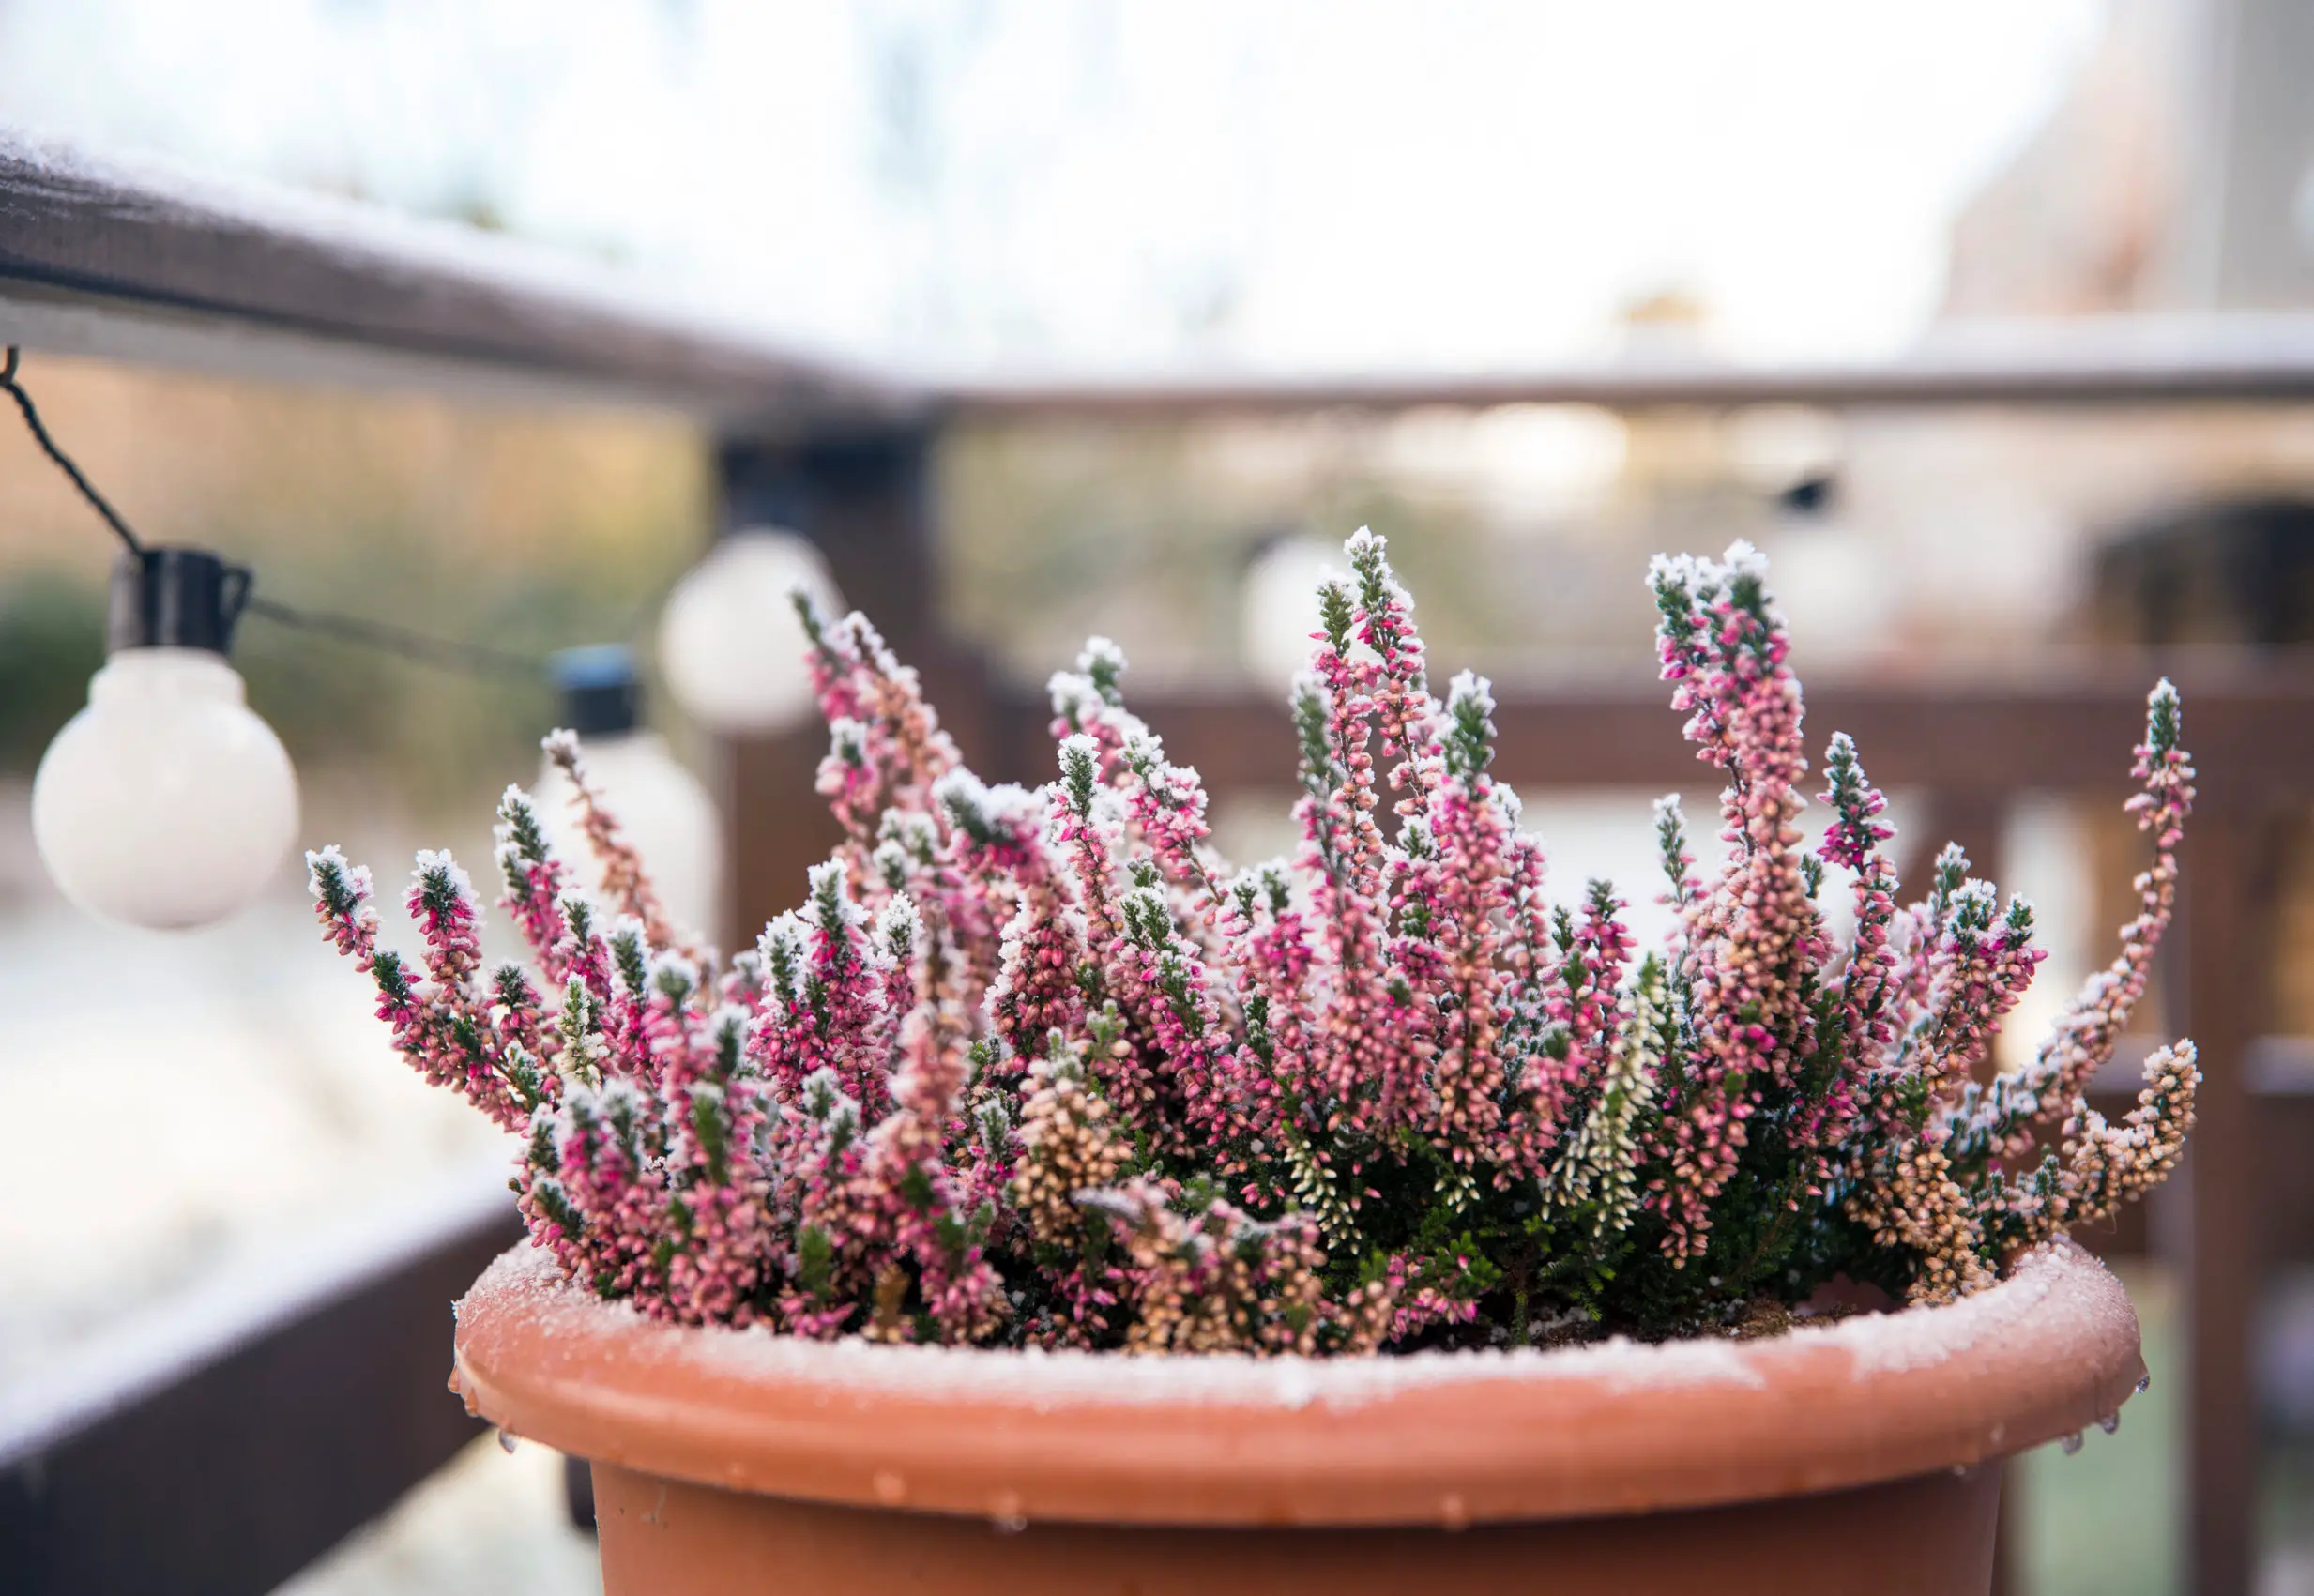 What To Do With Potted Perennials In Winter